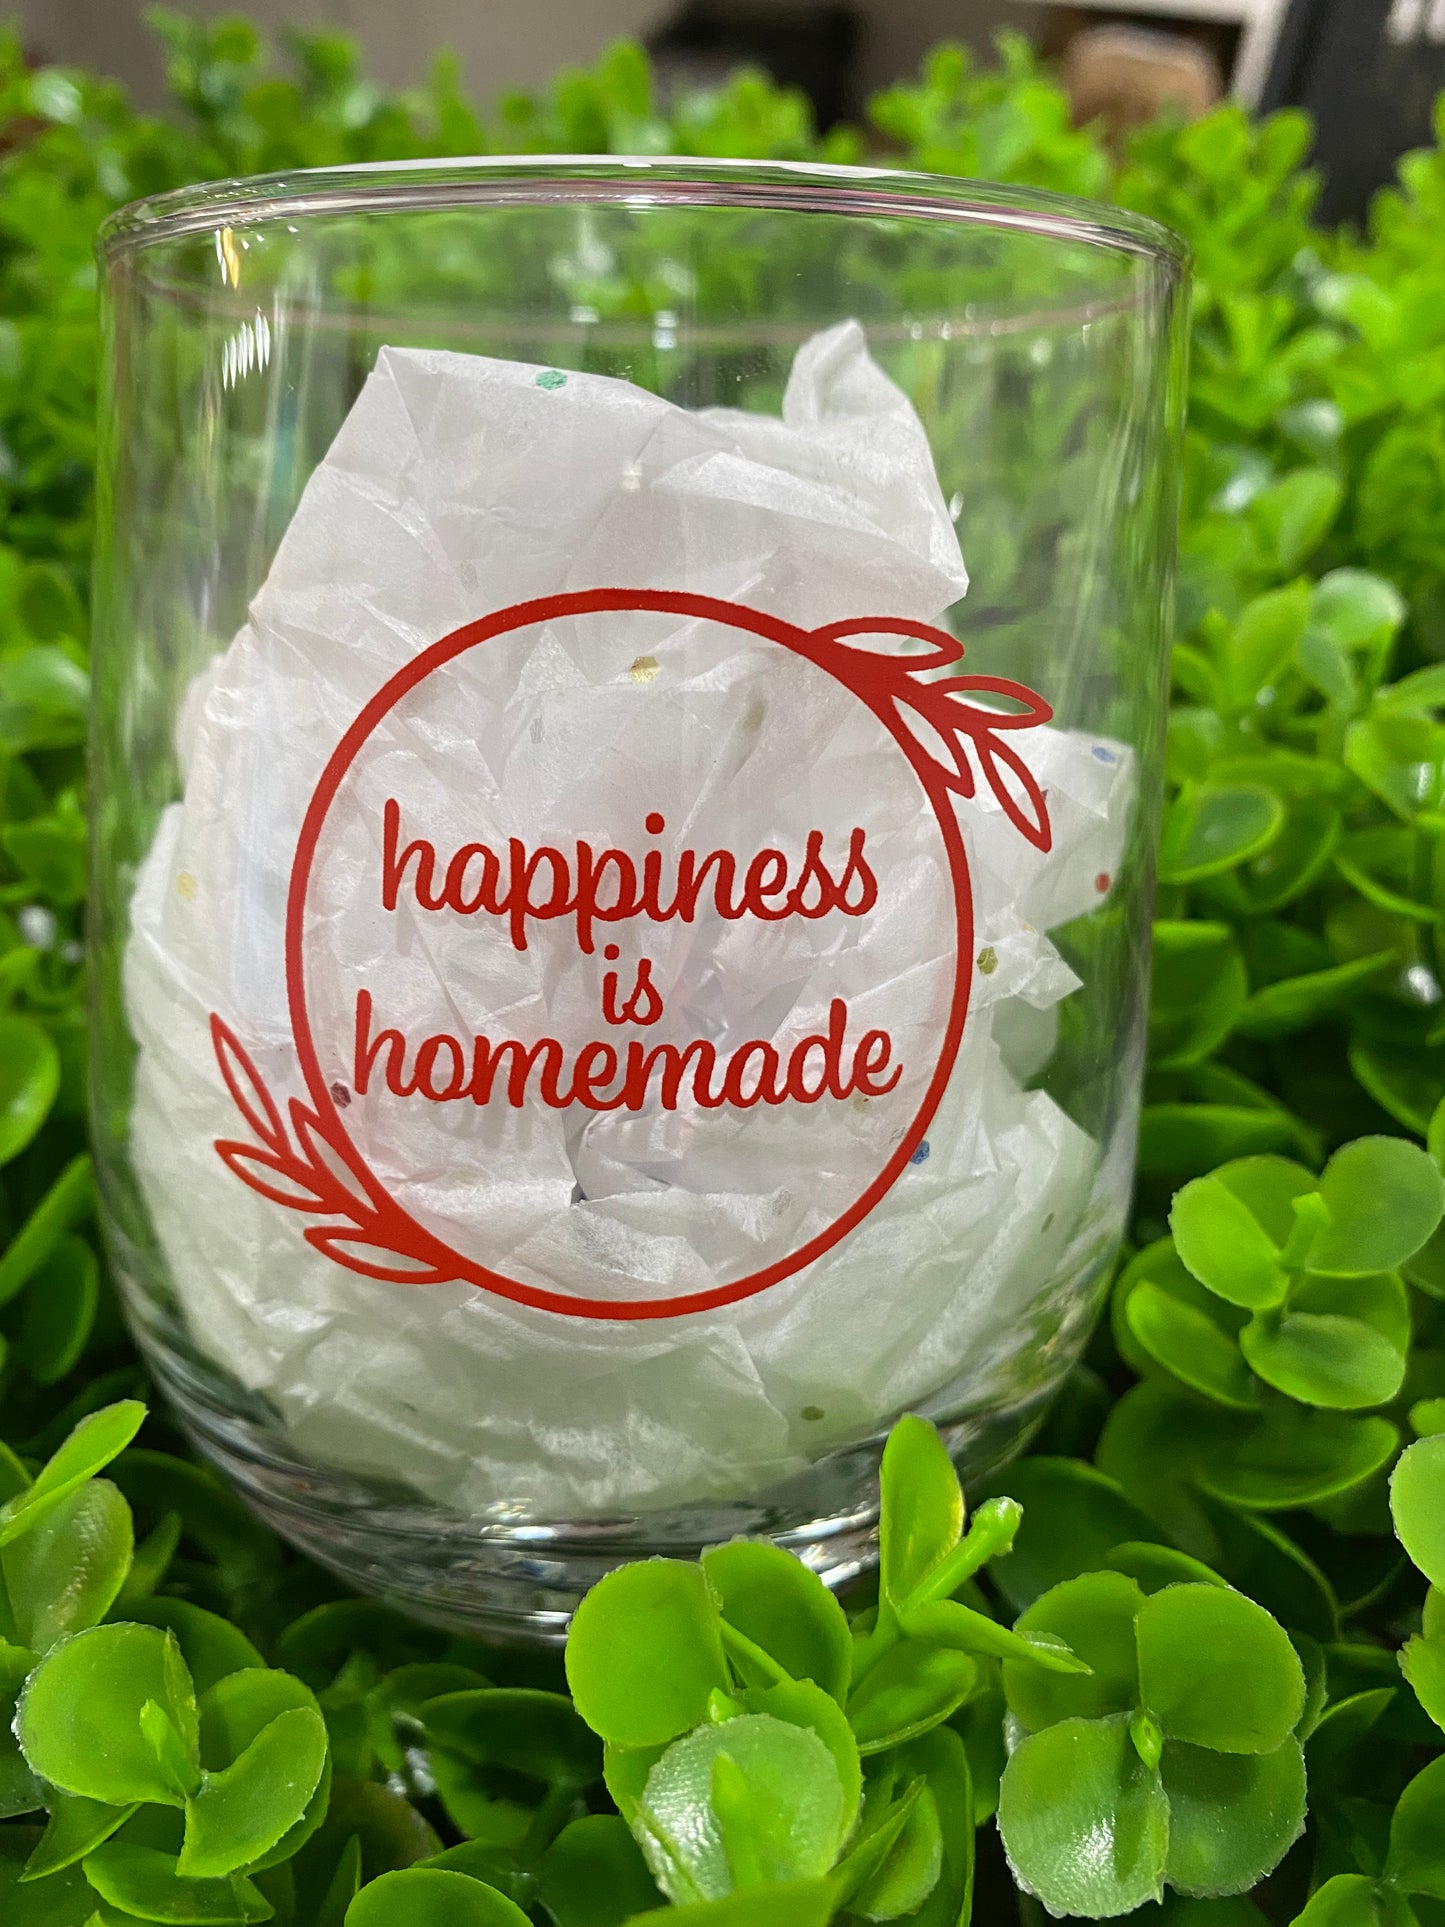 Copa:  Happiness is homemade